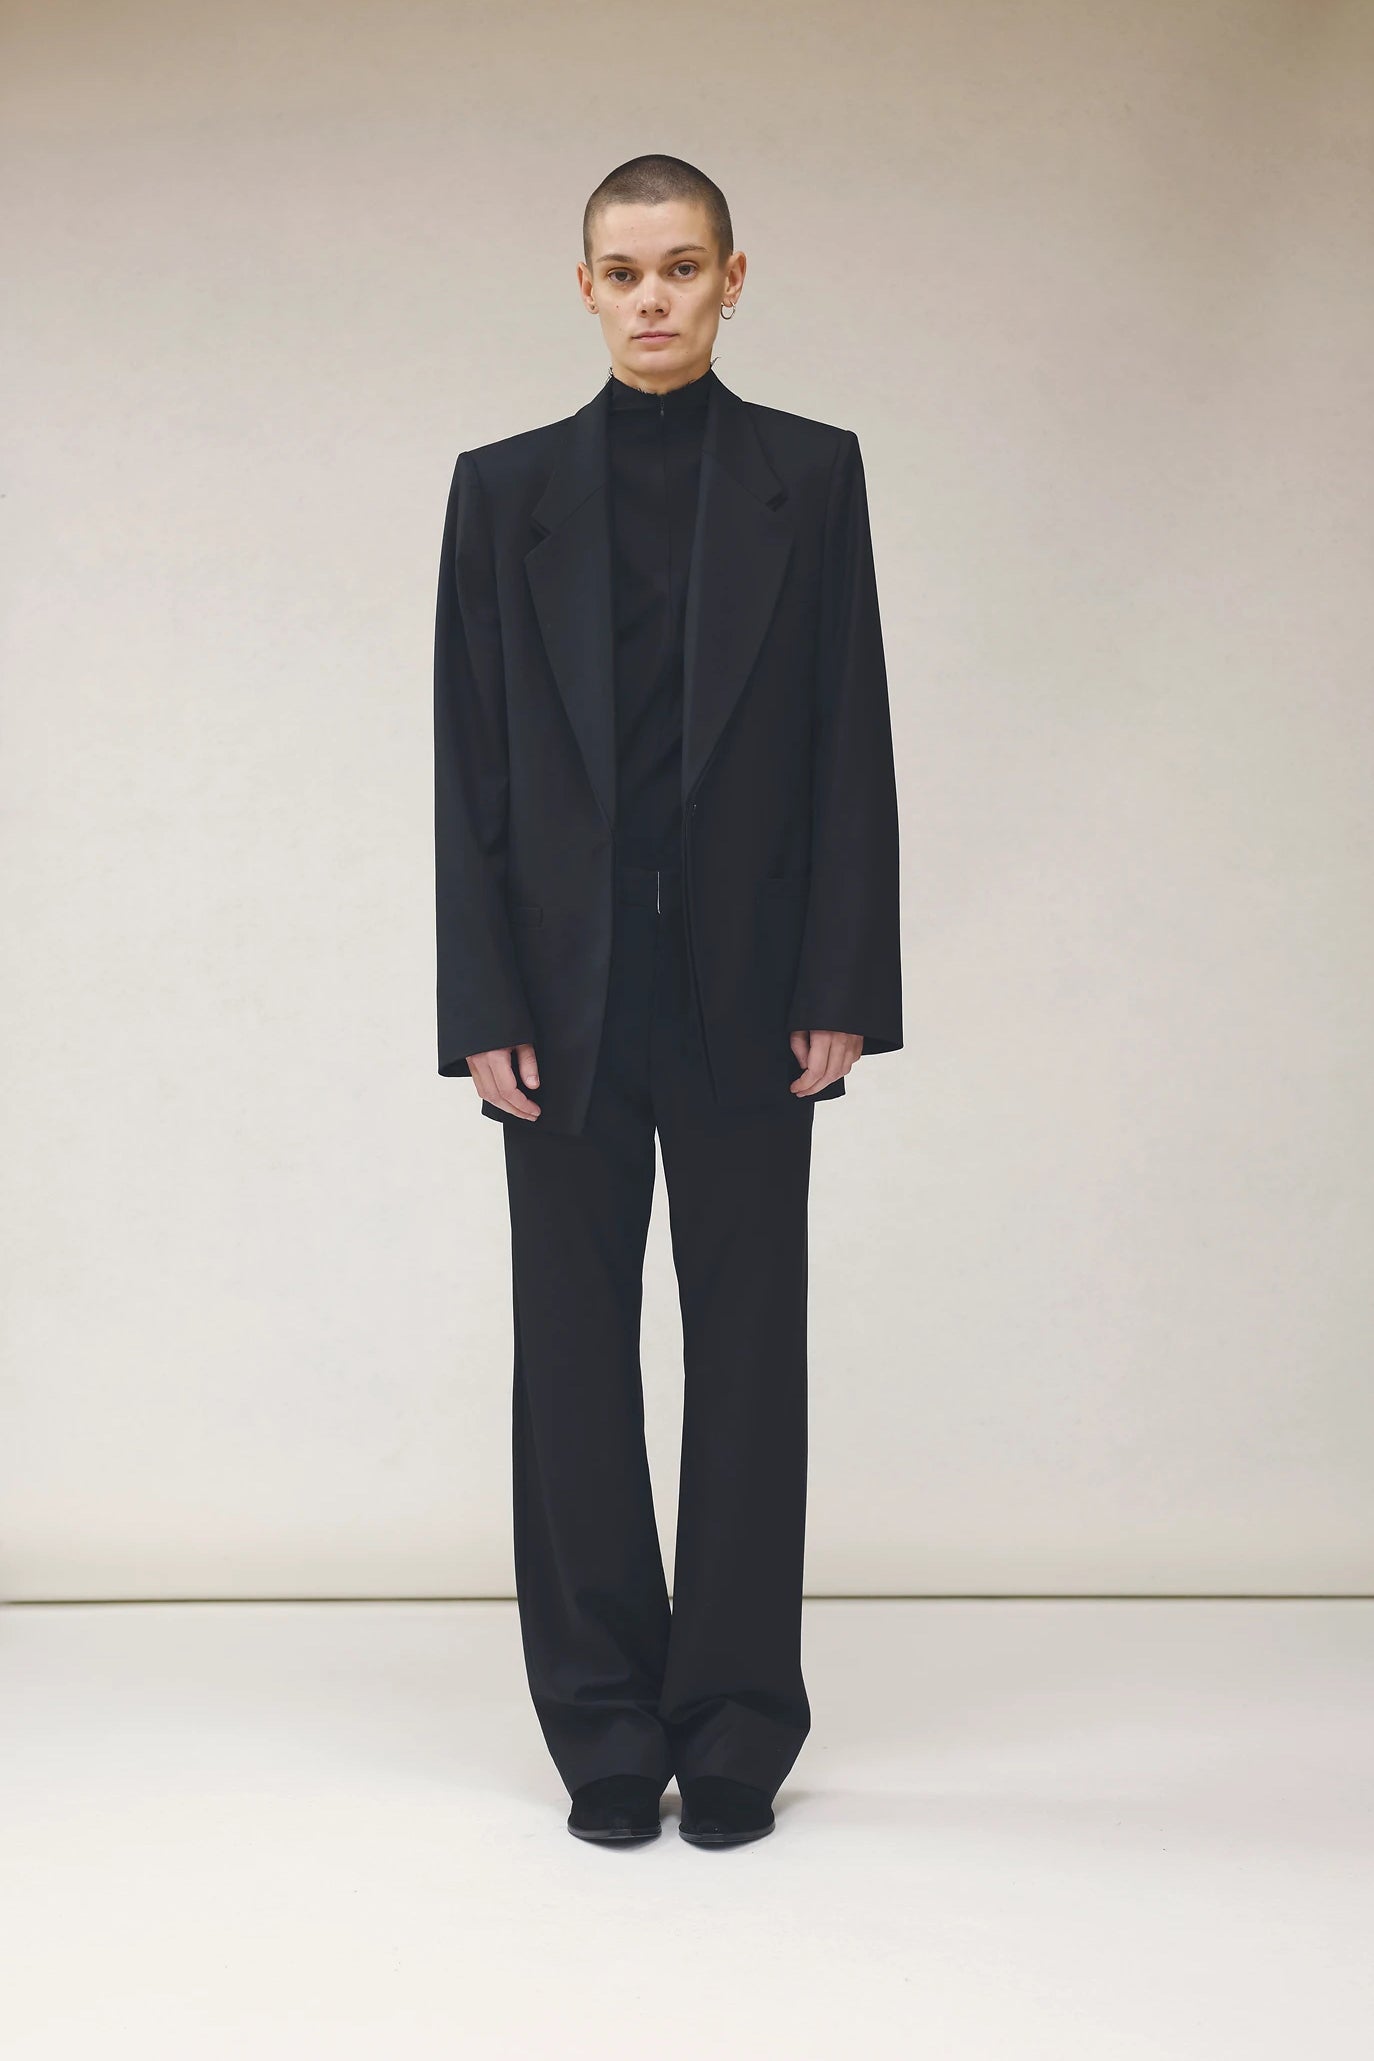 Gabriela Coll Garments - Assembly New York | Assembly New York